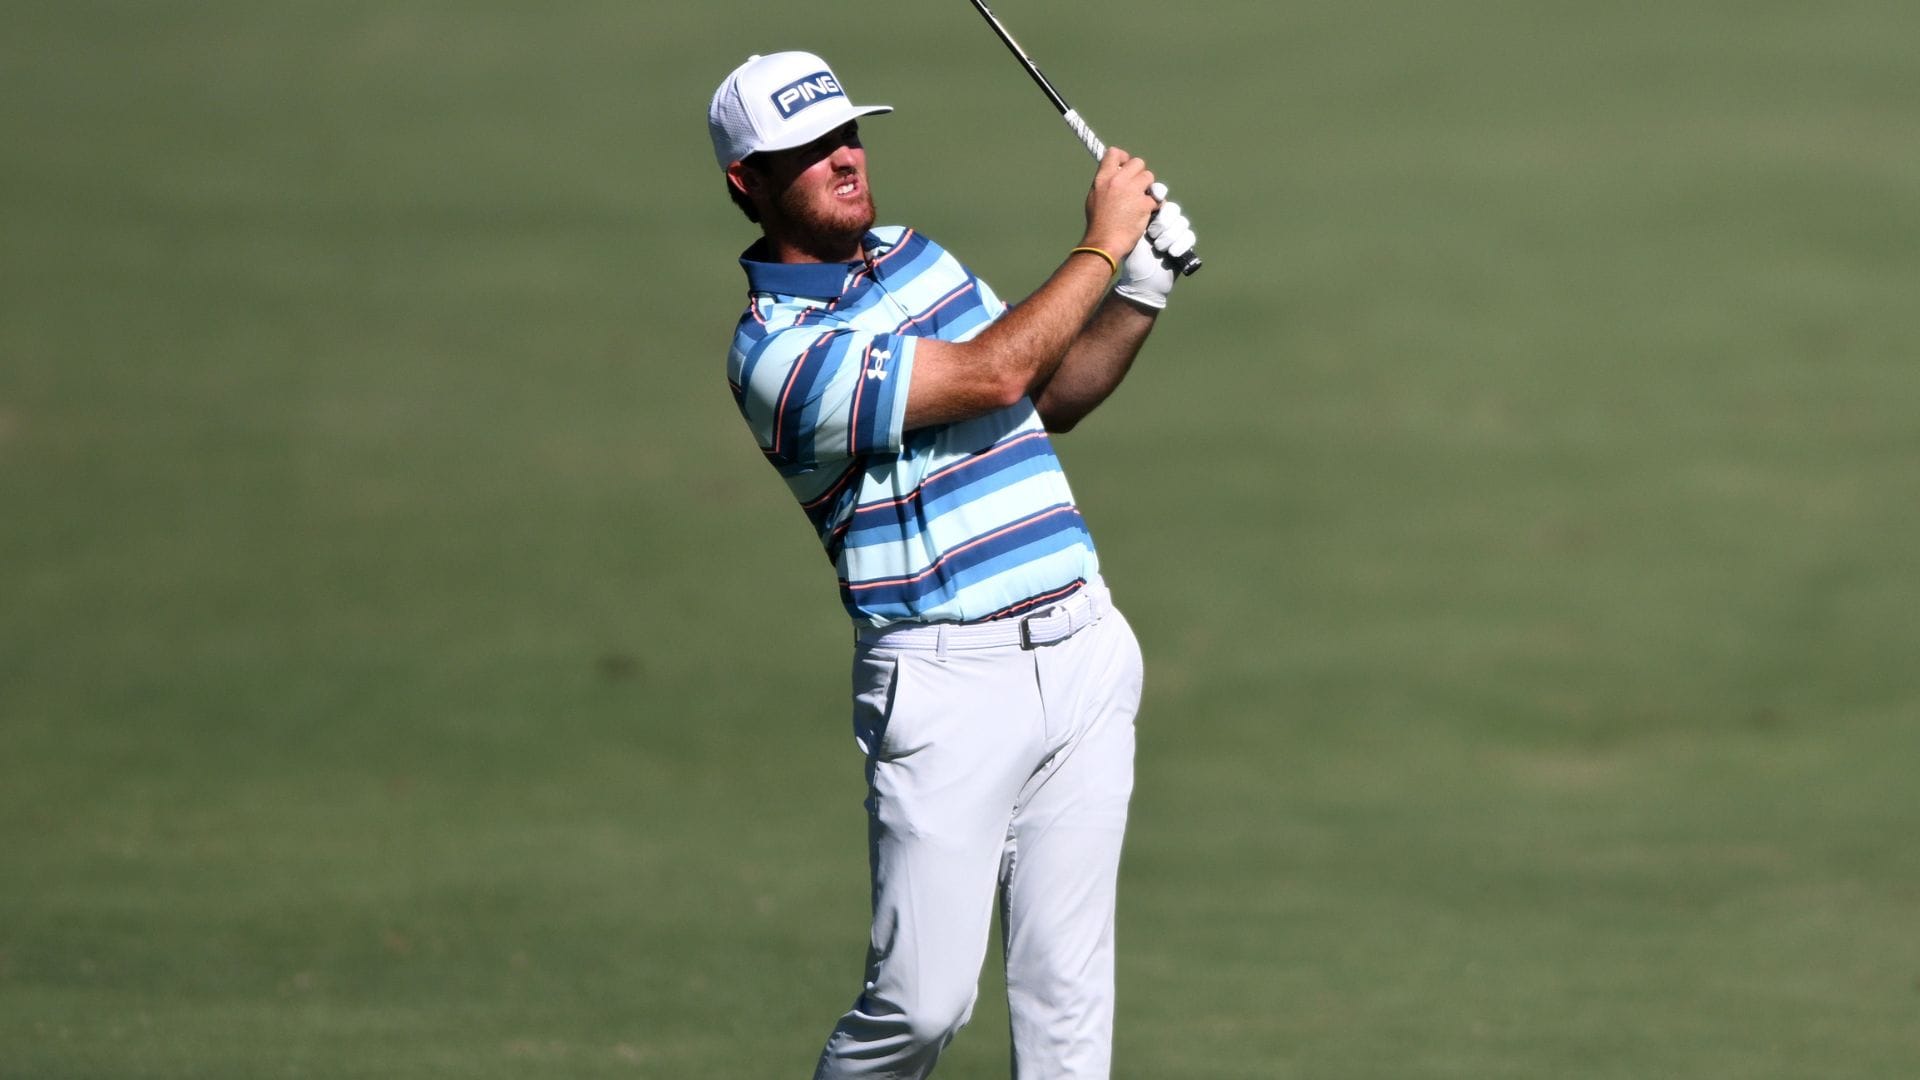 Mito Pereira grabs Shriners Children’s Open lead with Friday 63; Tom Kim, Si Woo Kim in hunt